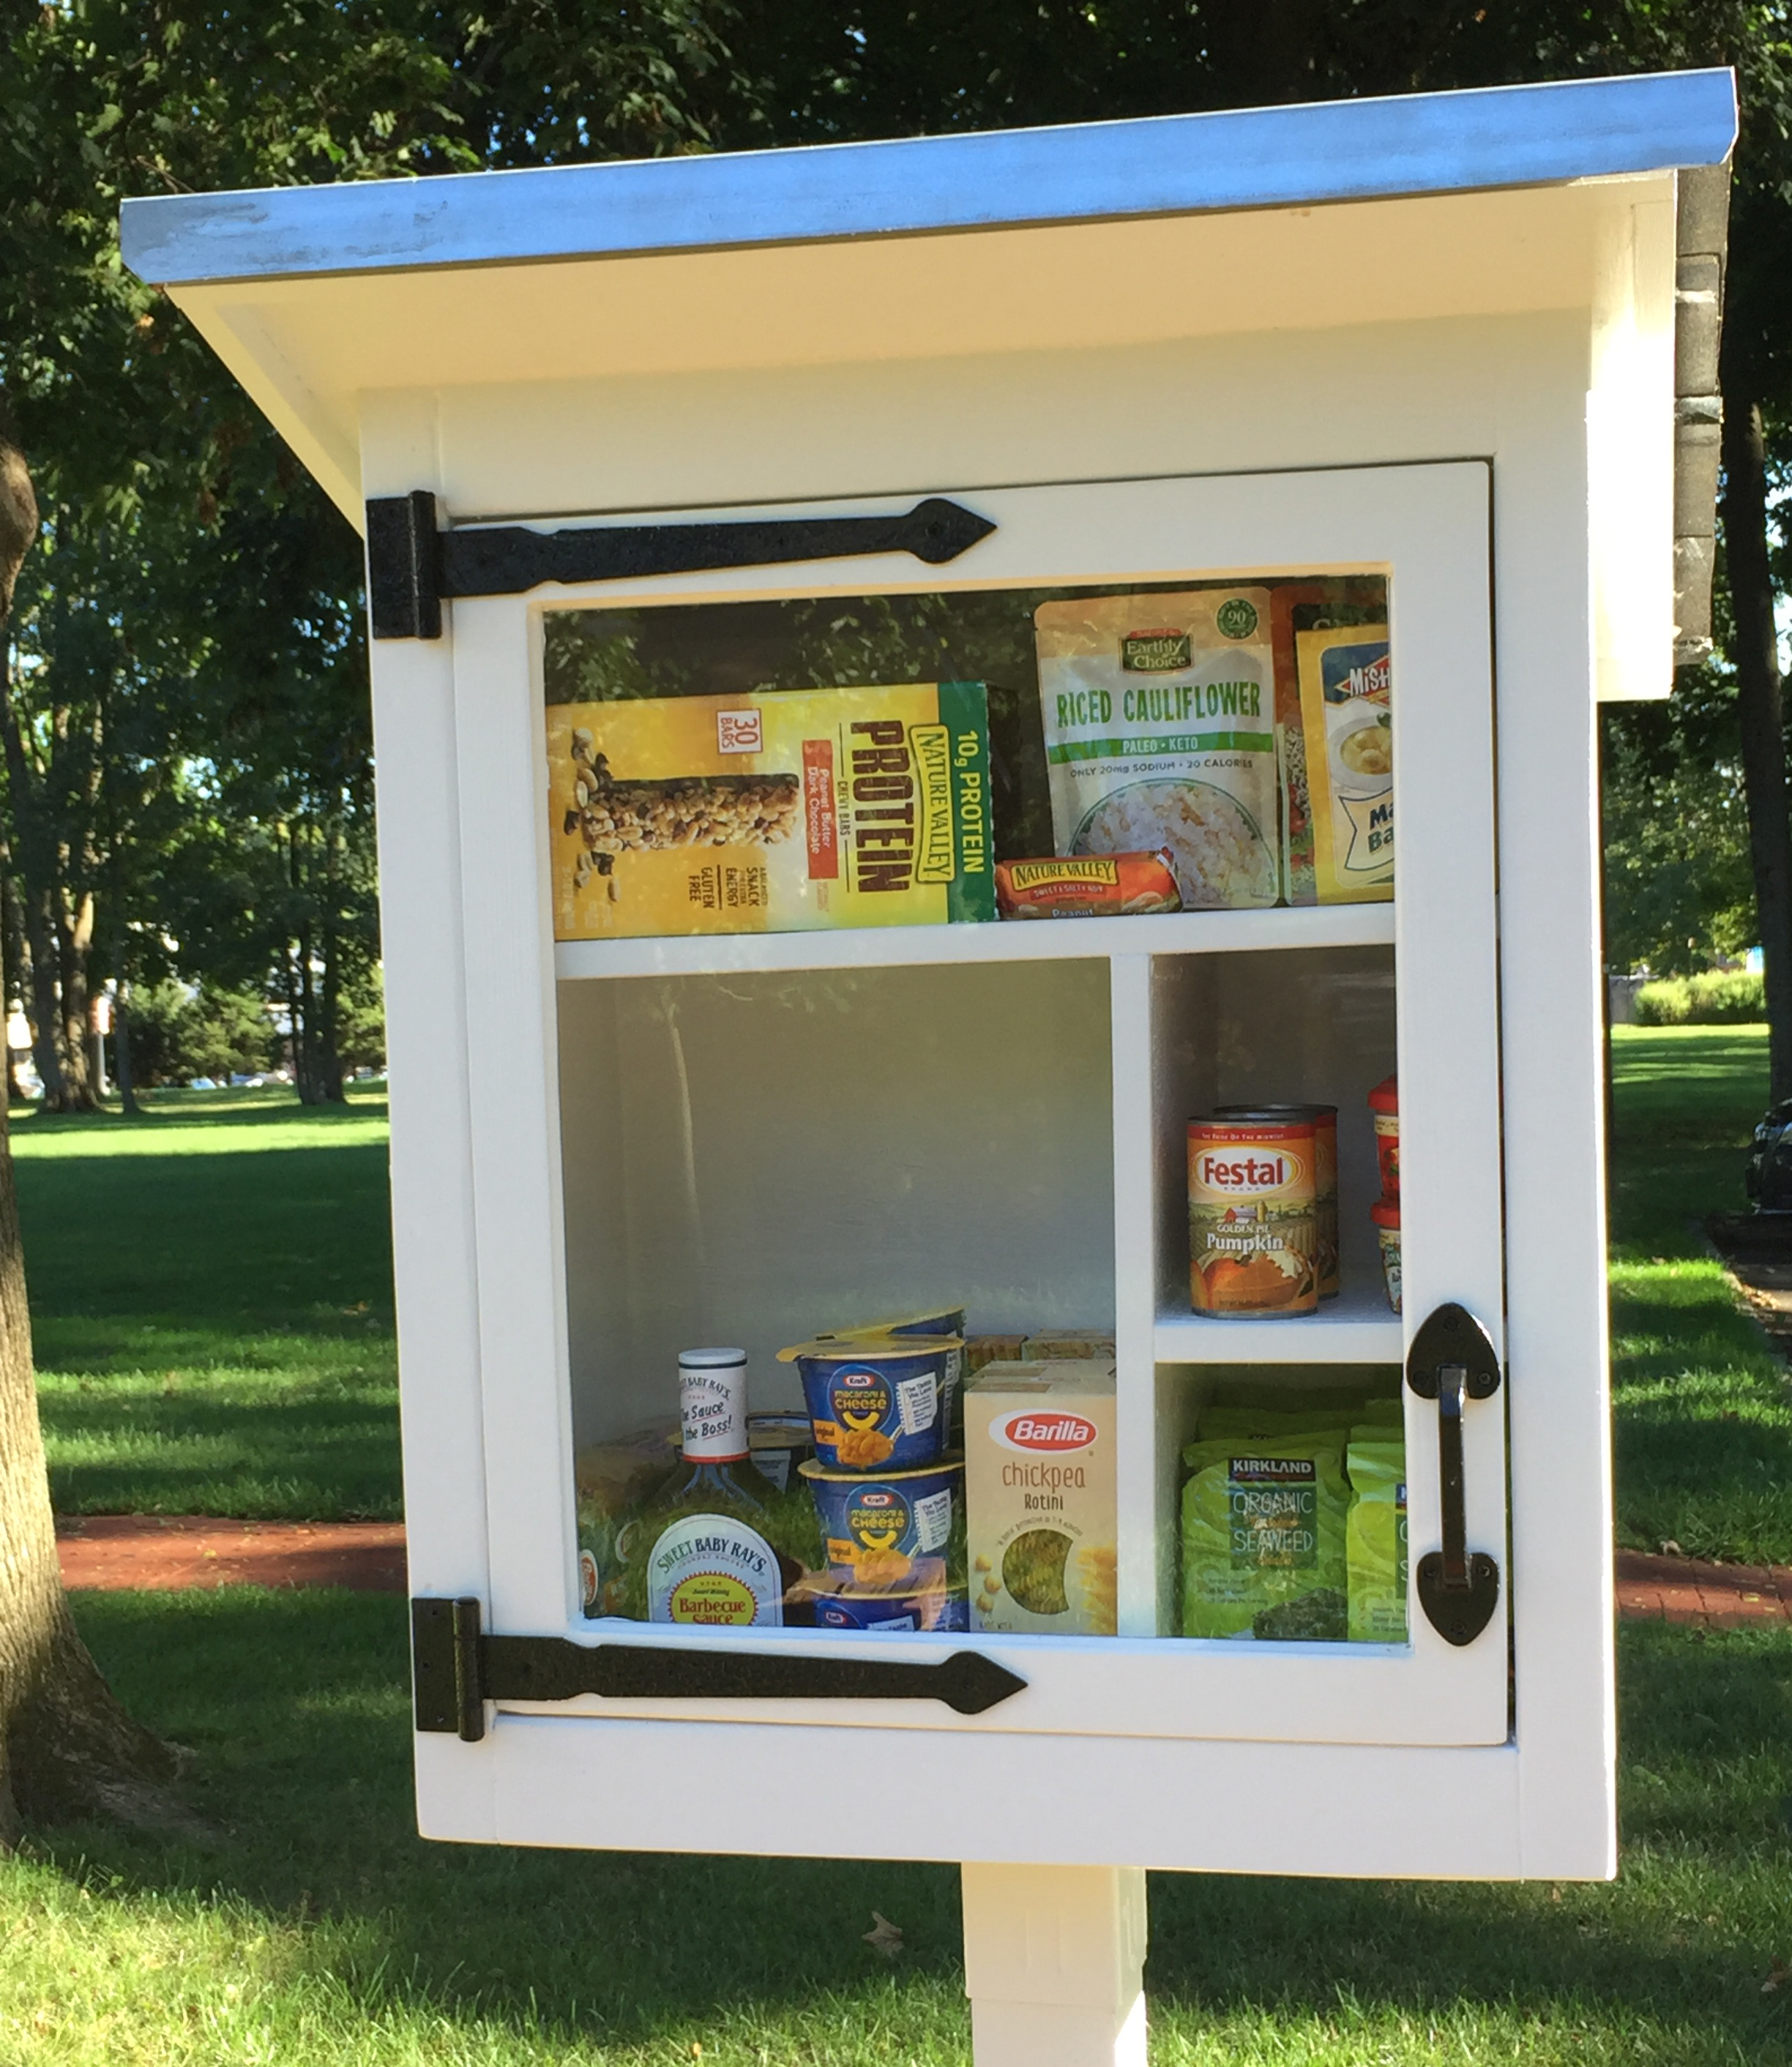 Food Pantry Box with food inside
<br />